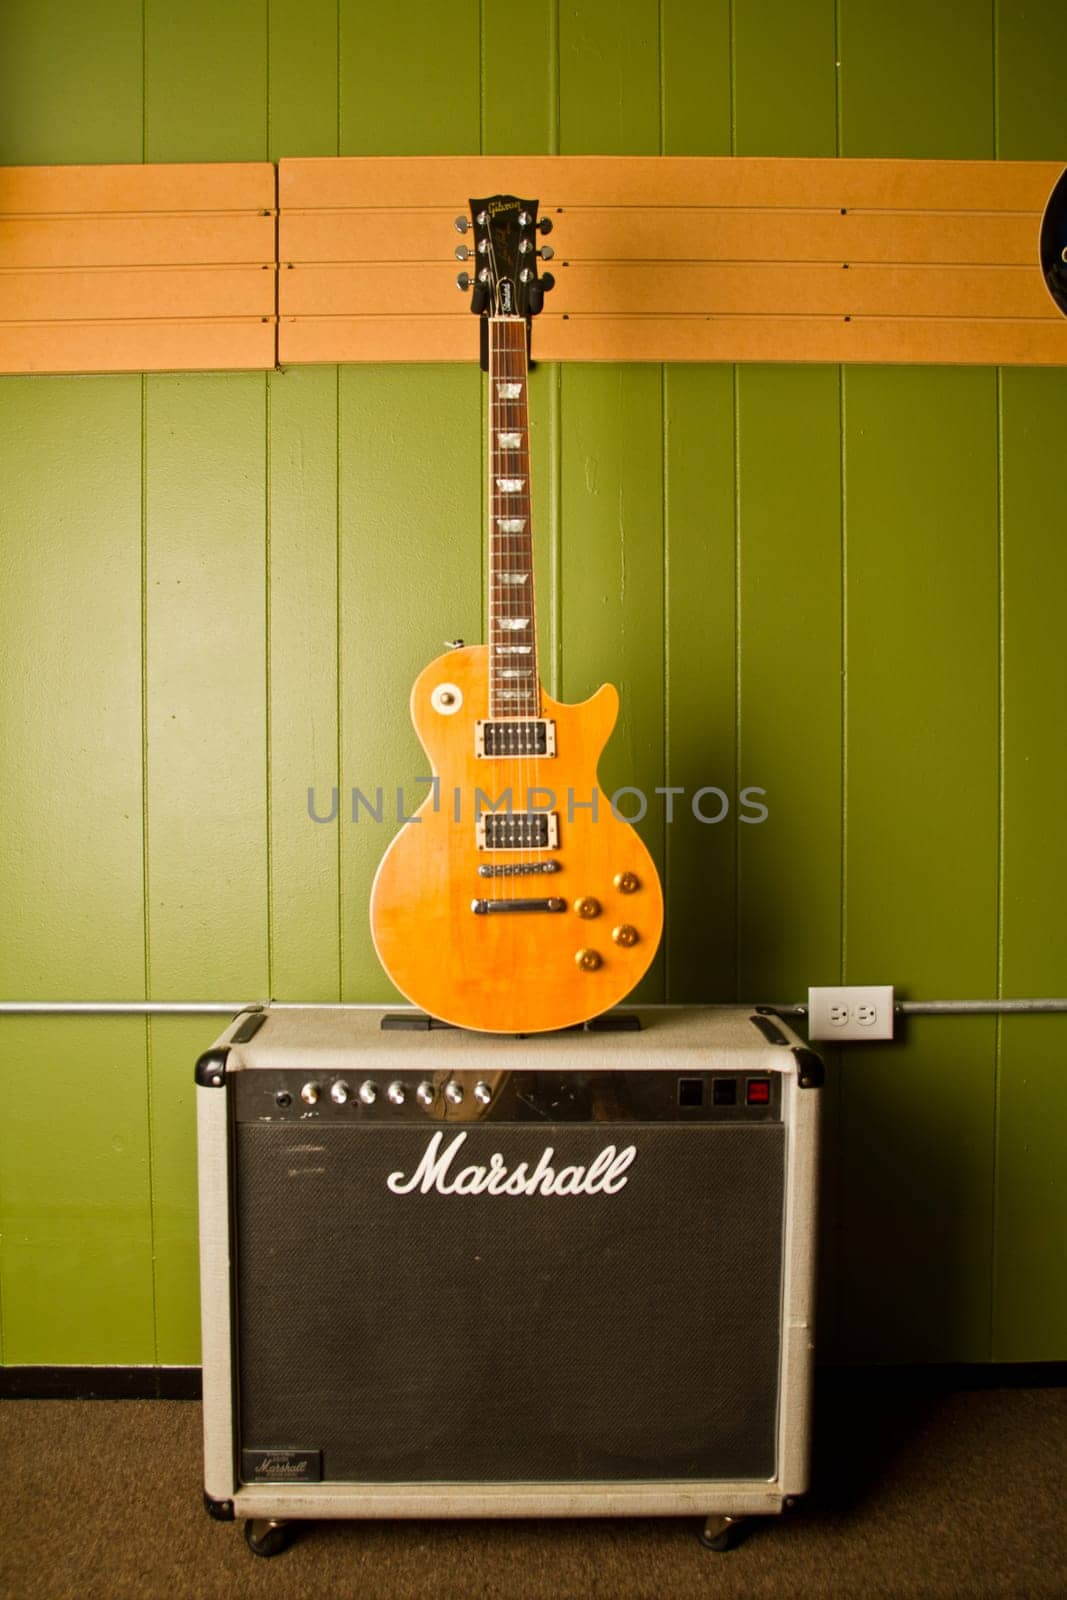 Rock and Roll Vibes: A sunburst electric guitar leans against a green wall, contrasting sharply and drawing attention to its sleek, polished body. The iconic Marshall amplifier stands ready for performance, evoking power and presence.